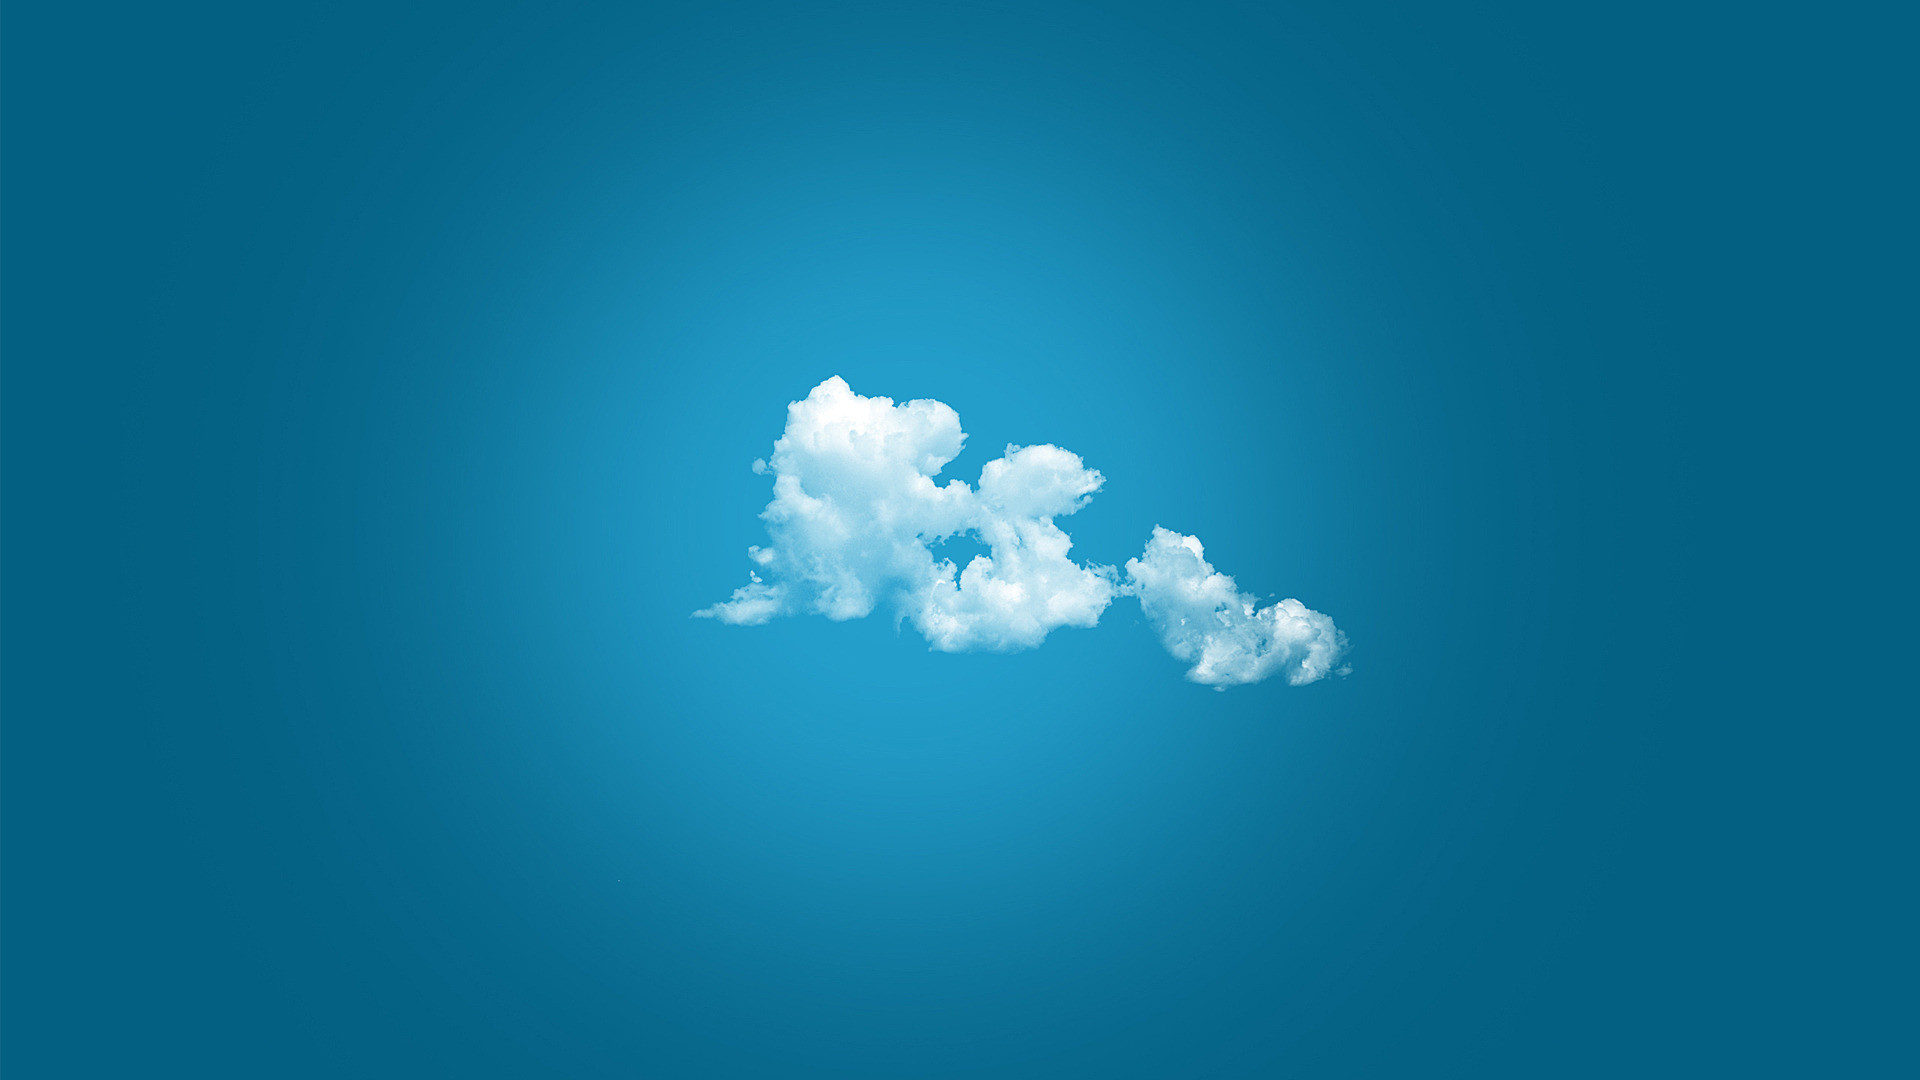 Free Clouds On Blue Background Wallpapers, Clouds On Blue Background Pictures, Clouds On Blue Background Photos, Clouds On Blue Background wallpaper